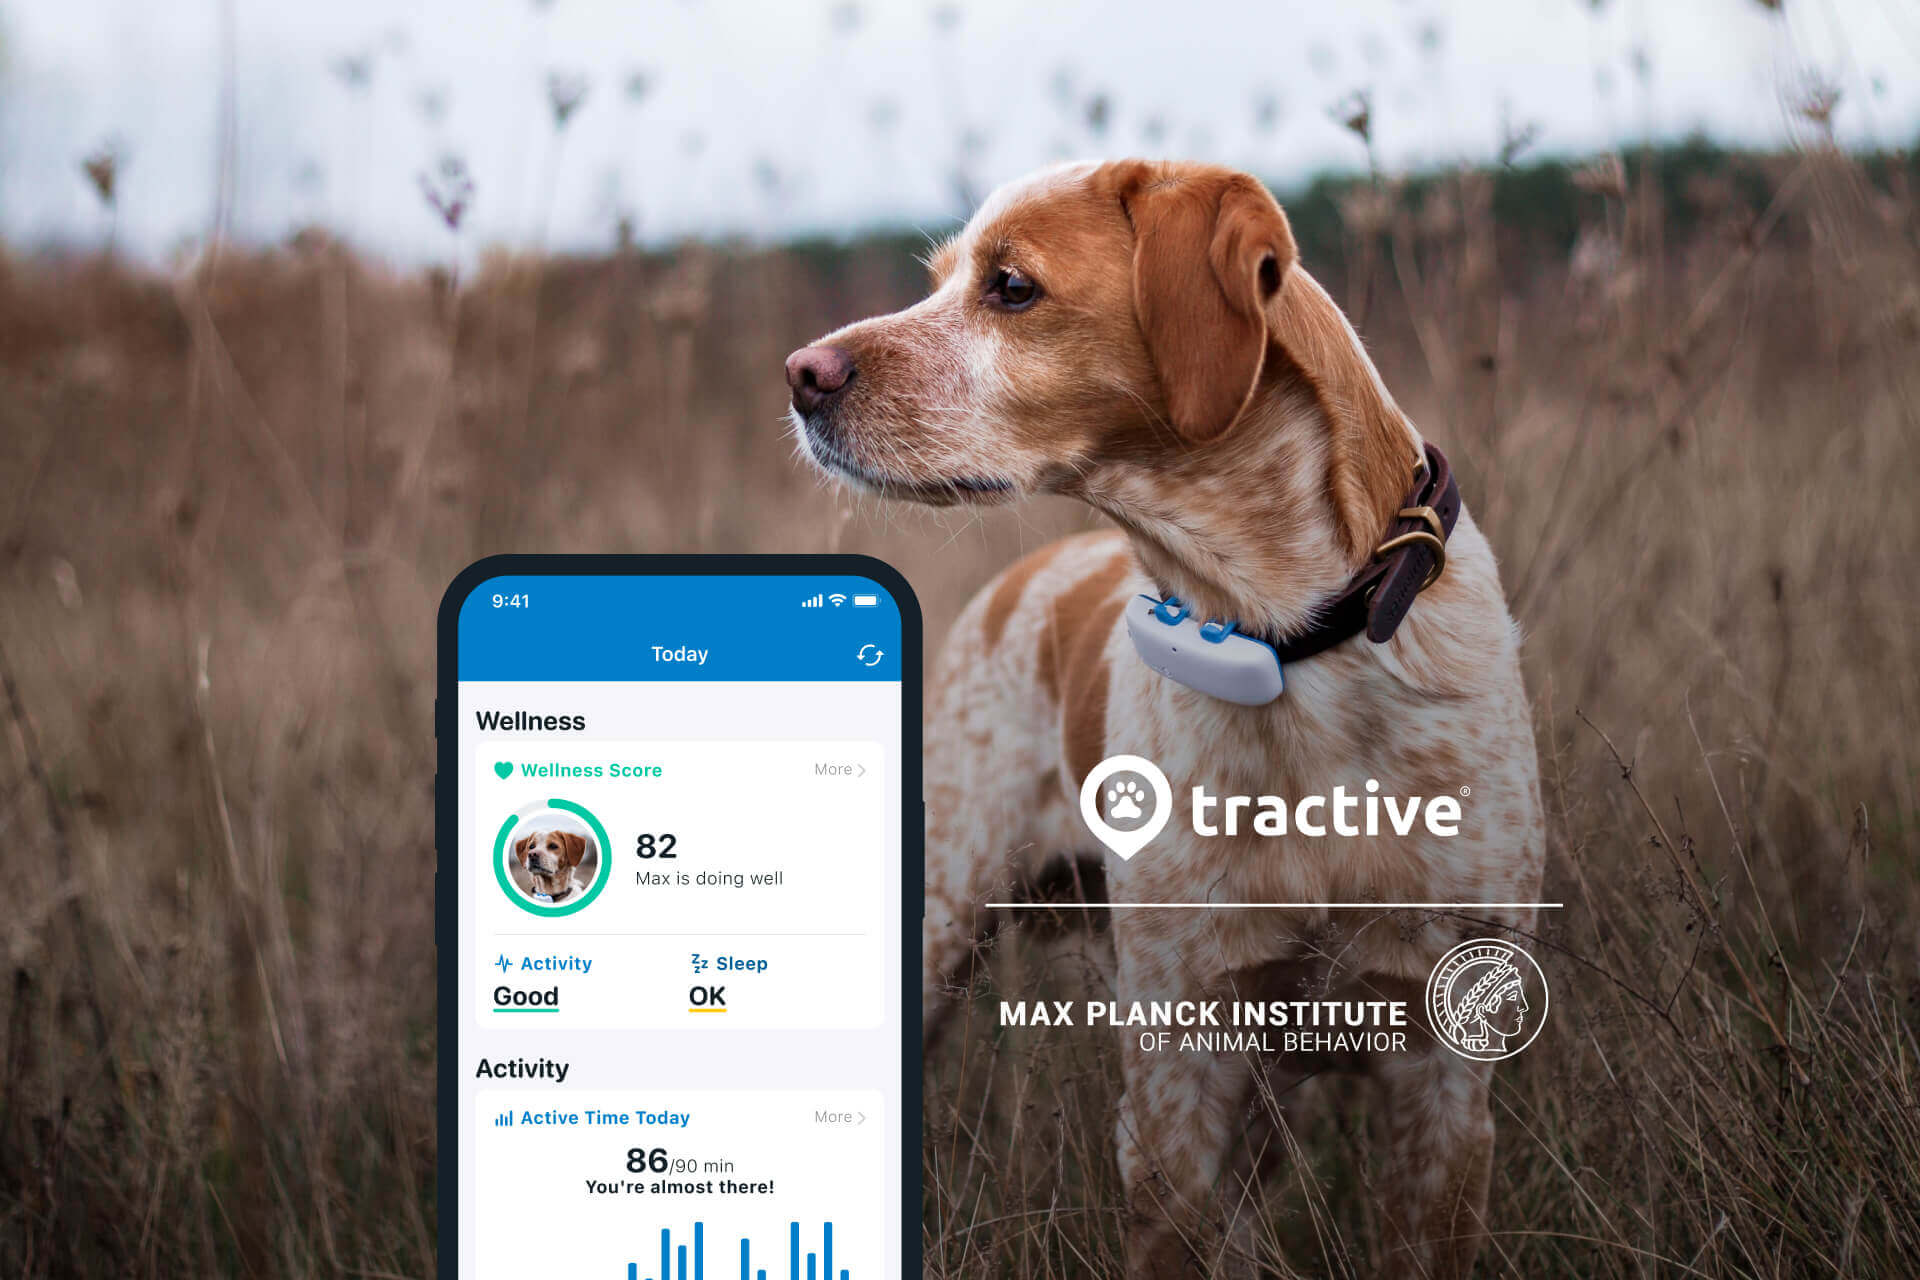 Max Planck Institute Uses Tractive Trackers to Gain New Insights into the Health and Behavior of Pets